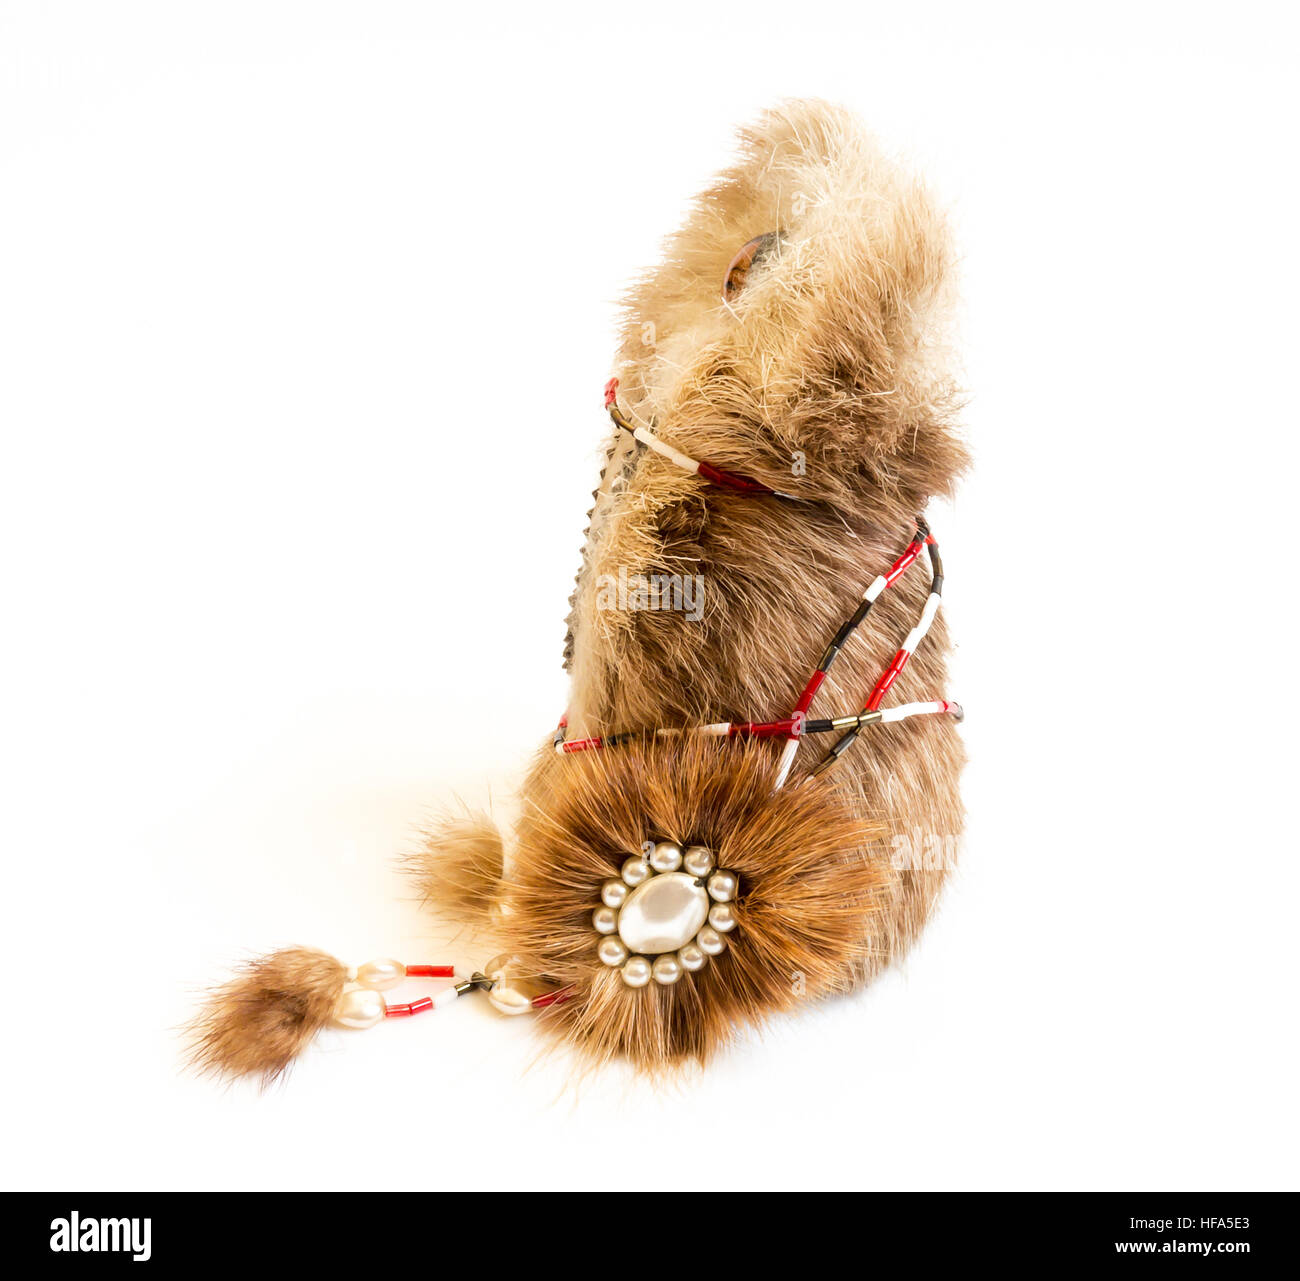 The Miniature fur isolated toy. Stock Photo